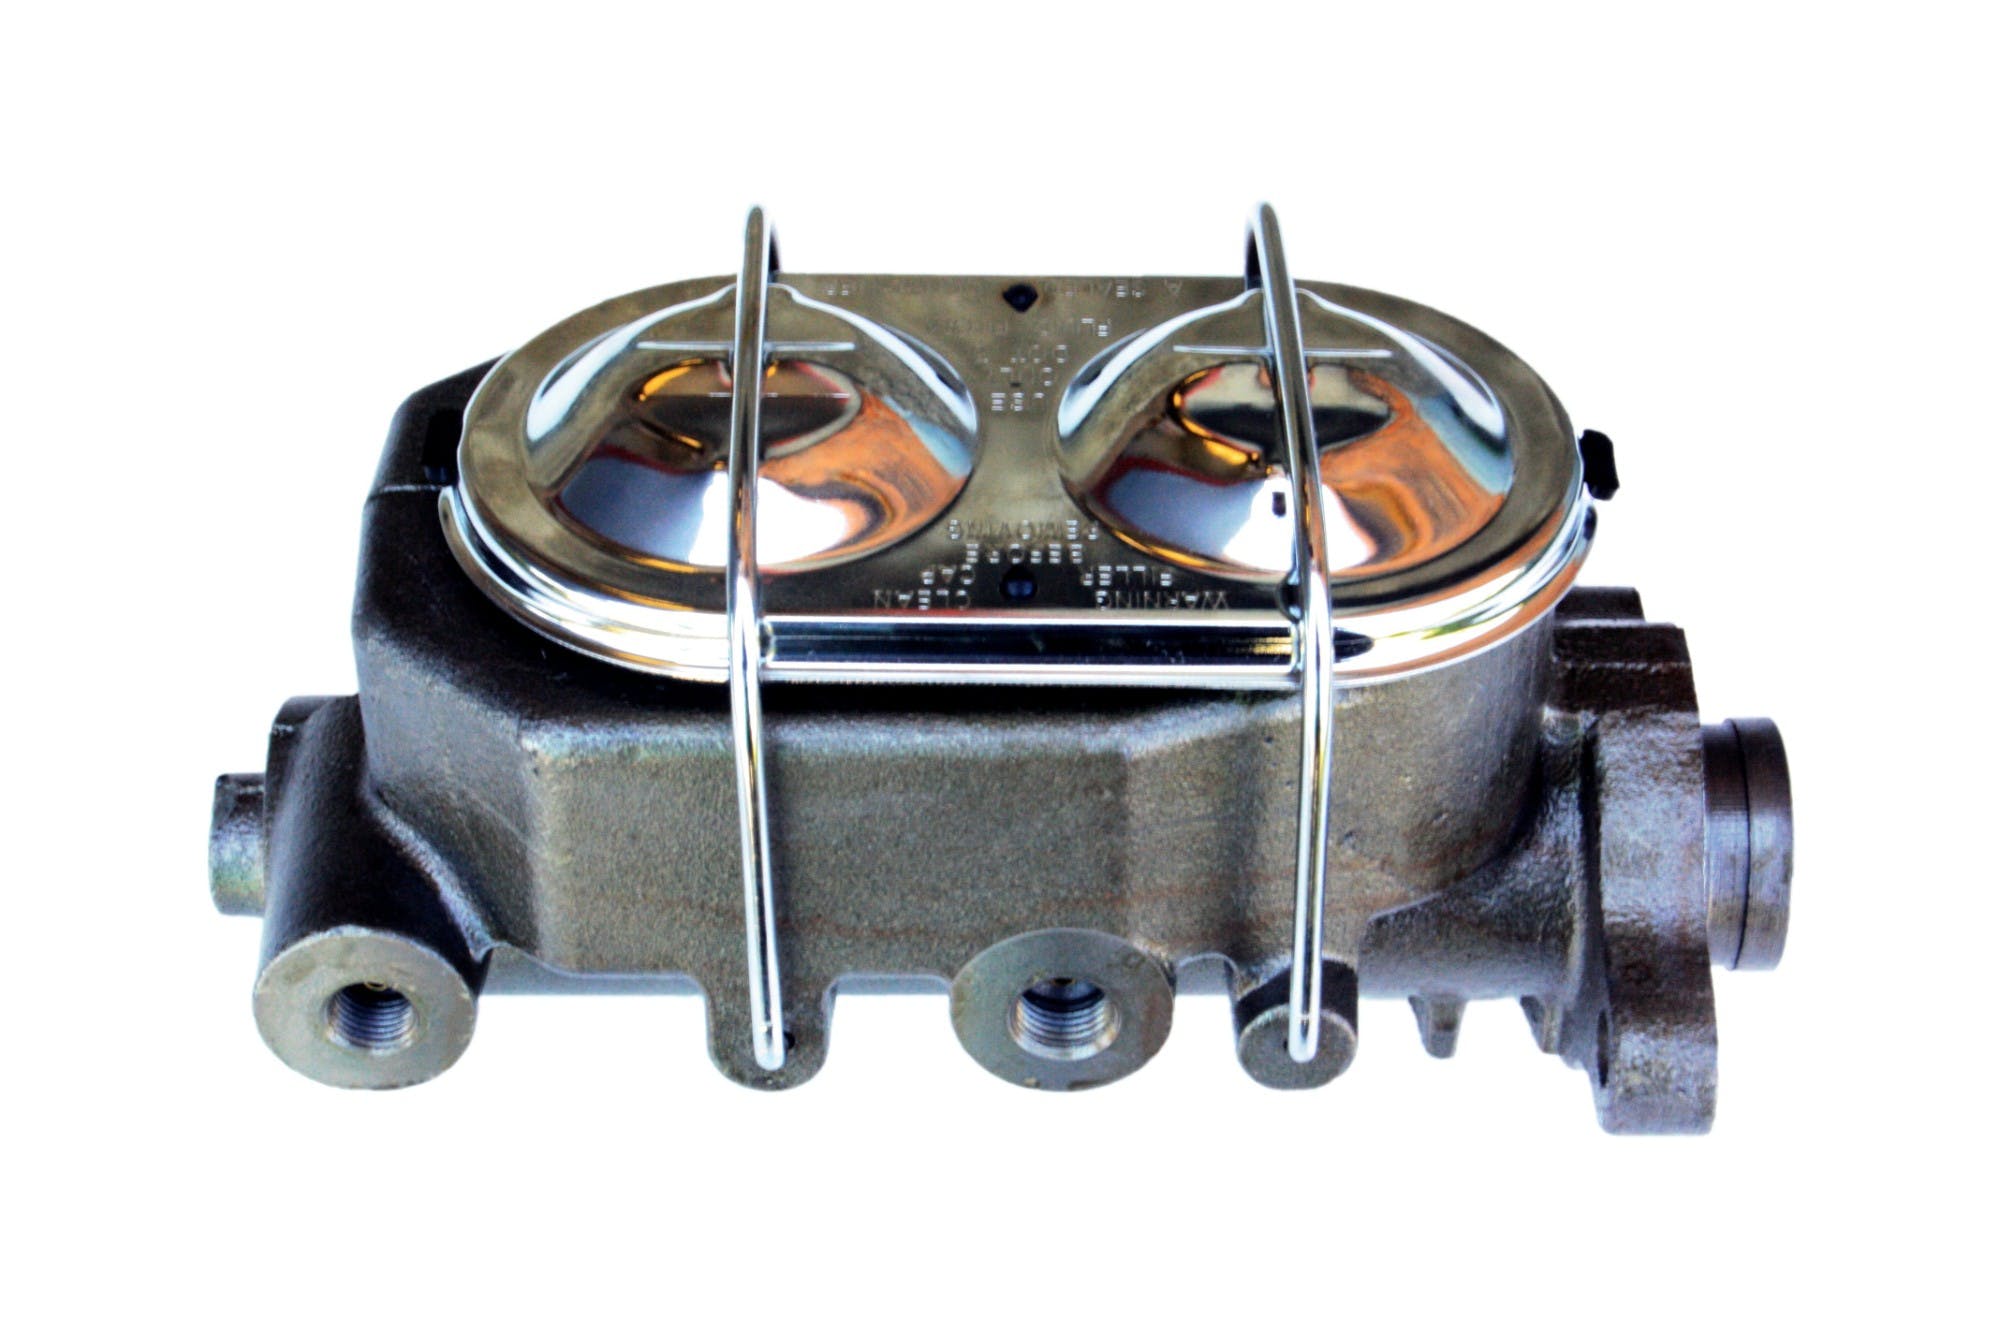 LEED Brakes 2FB 9 in Power Booster , 1-1/8in Bore Cast Iron Master with chrome lid (Chrome)